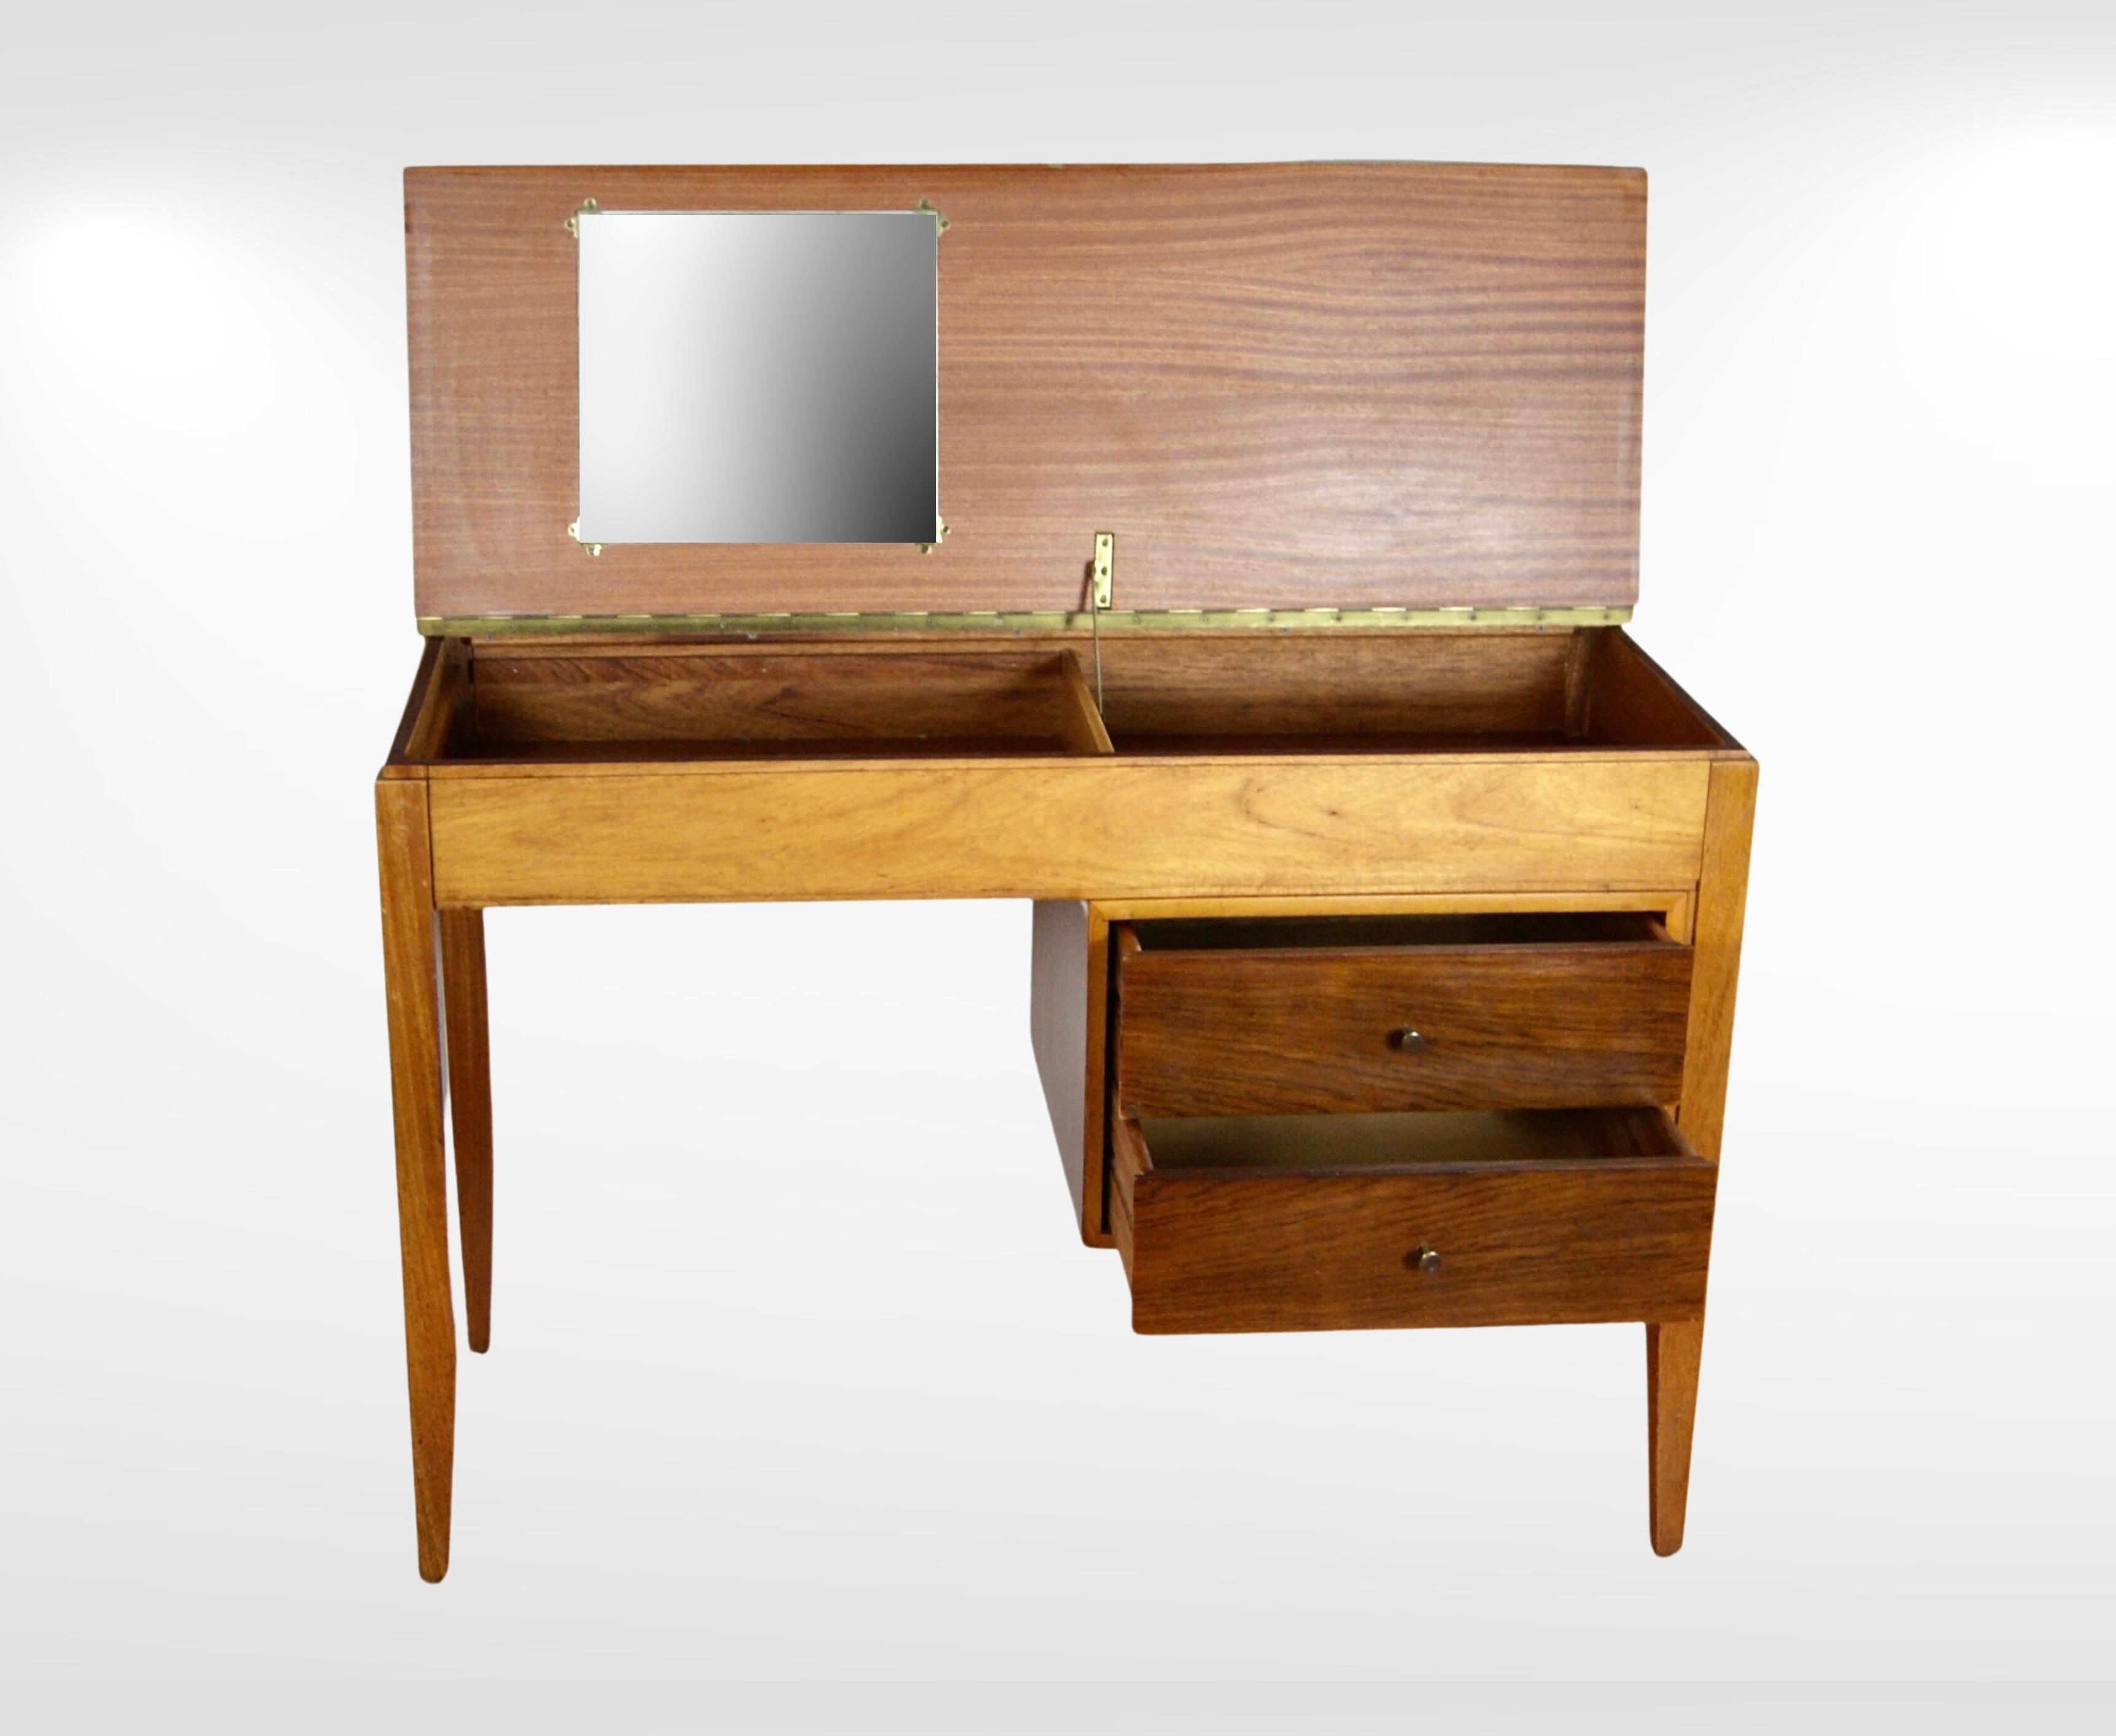 20th Century Retro Leather Top Desk/Dresser with Mirrored Interior Peter Hayward for UNIFLEX For Sale